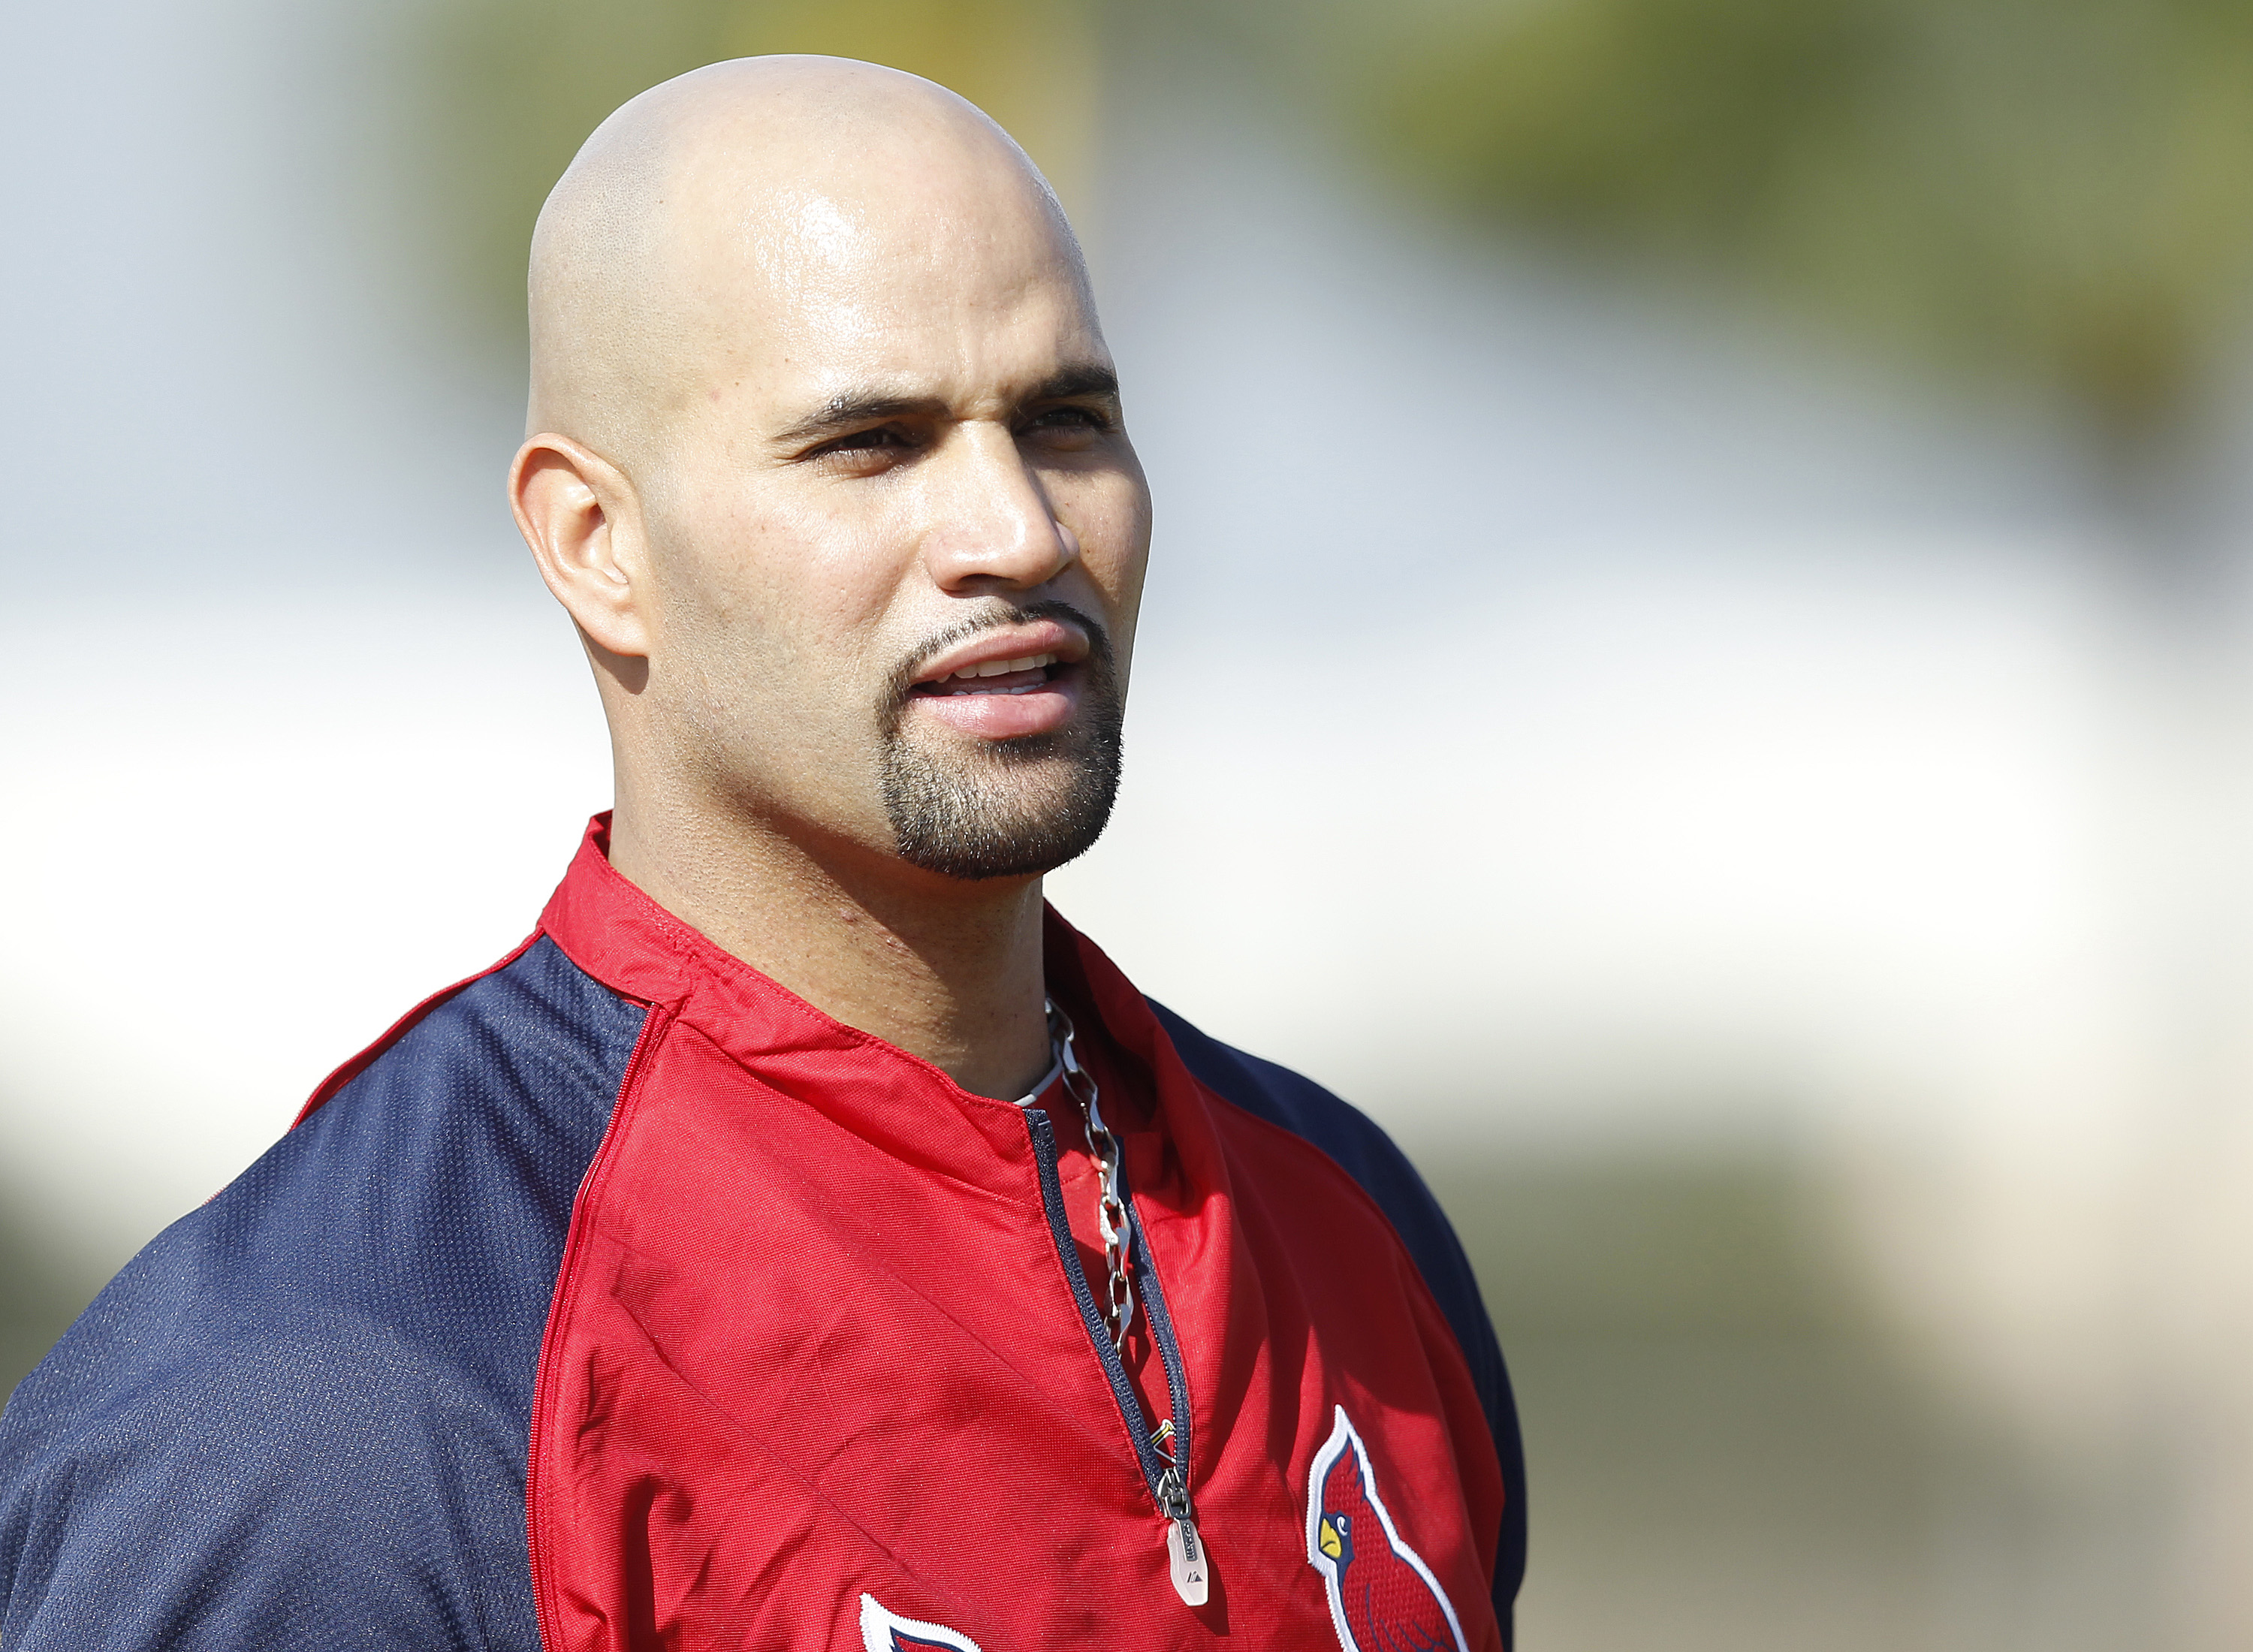 JUPITER, FL - FEBRUARY 17: Albert Pujols #5 of the St. Louis Cardinals  takes a rest during fielding practice at Roger Dean Stadium on February 17, 2011 in Jupiter, Florida. (Photo by Joel Auerbach/Getty Images)